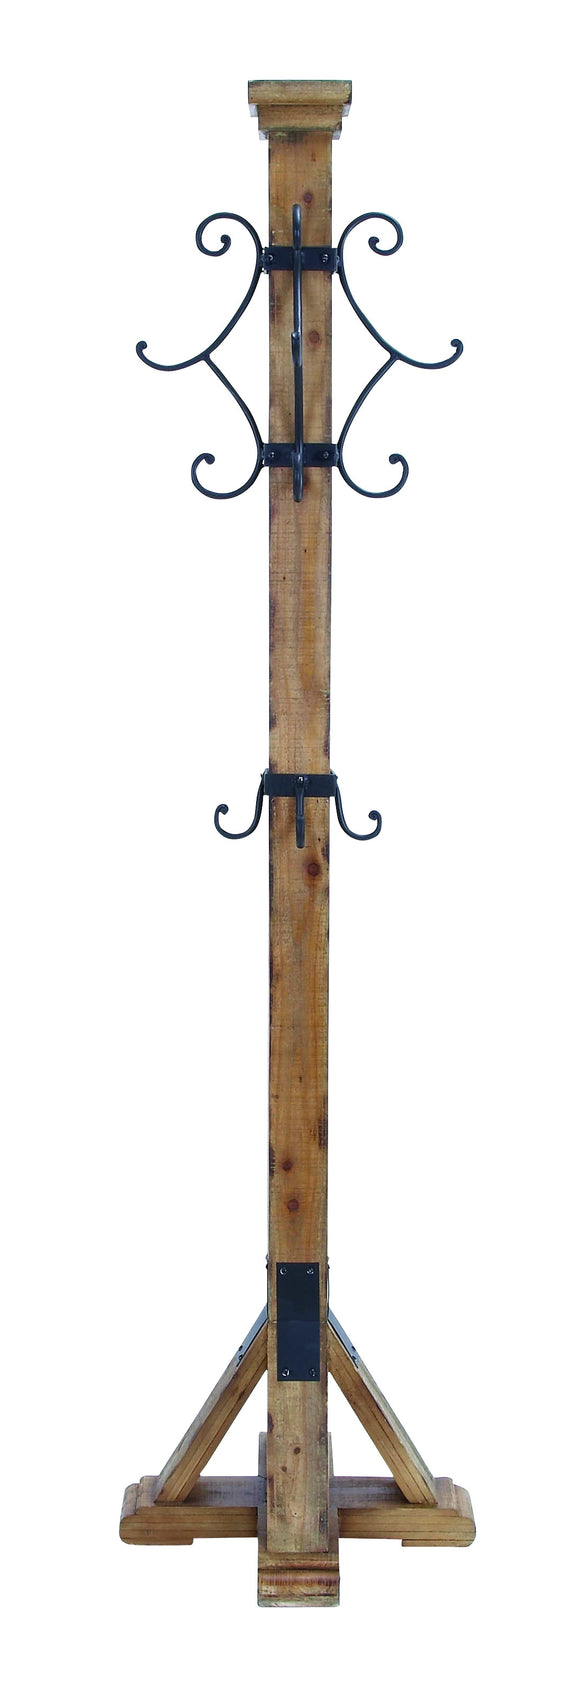 Metal Coat Rack with Exquisitely Crafted Pattern